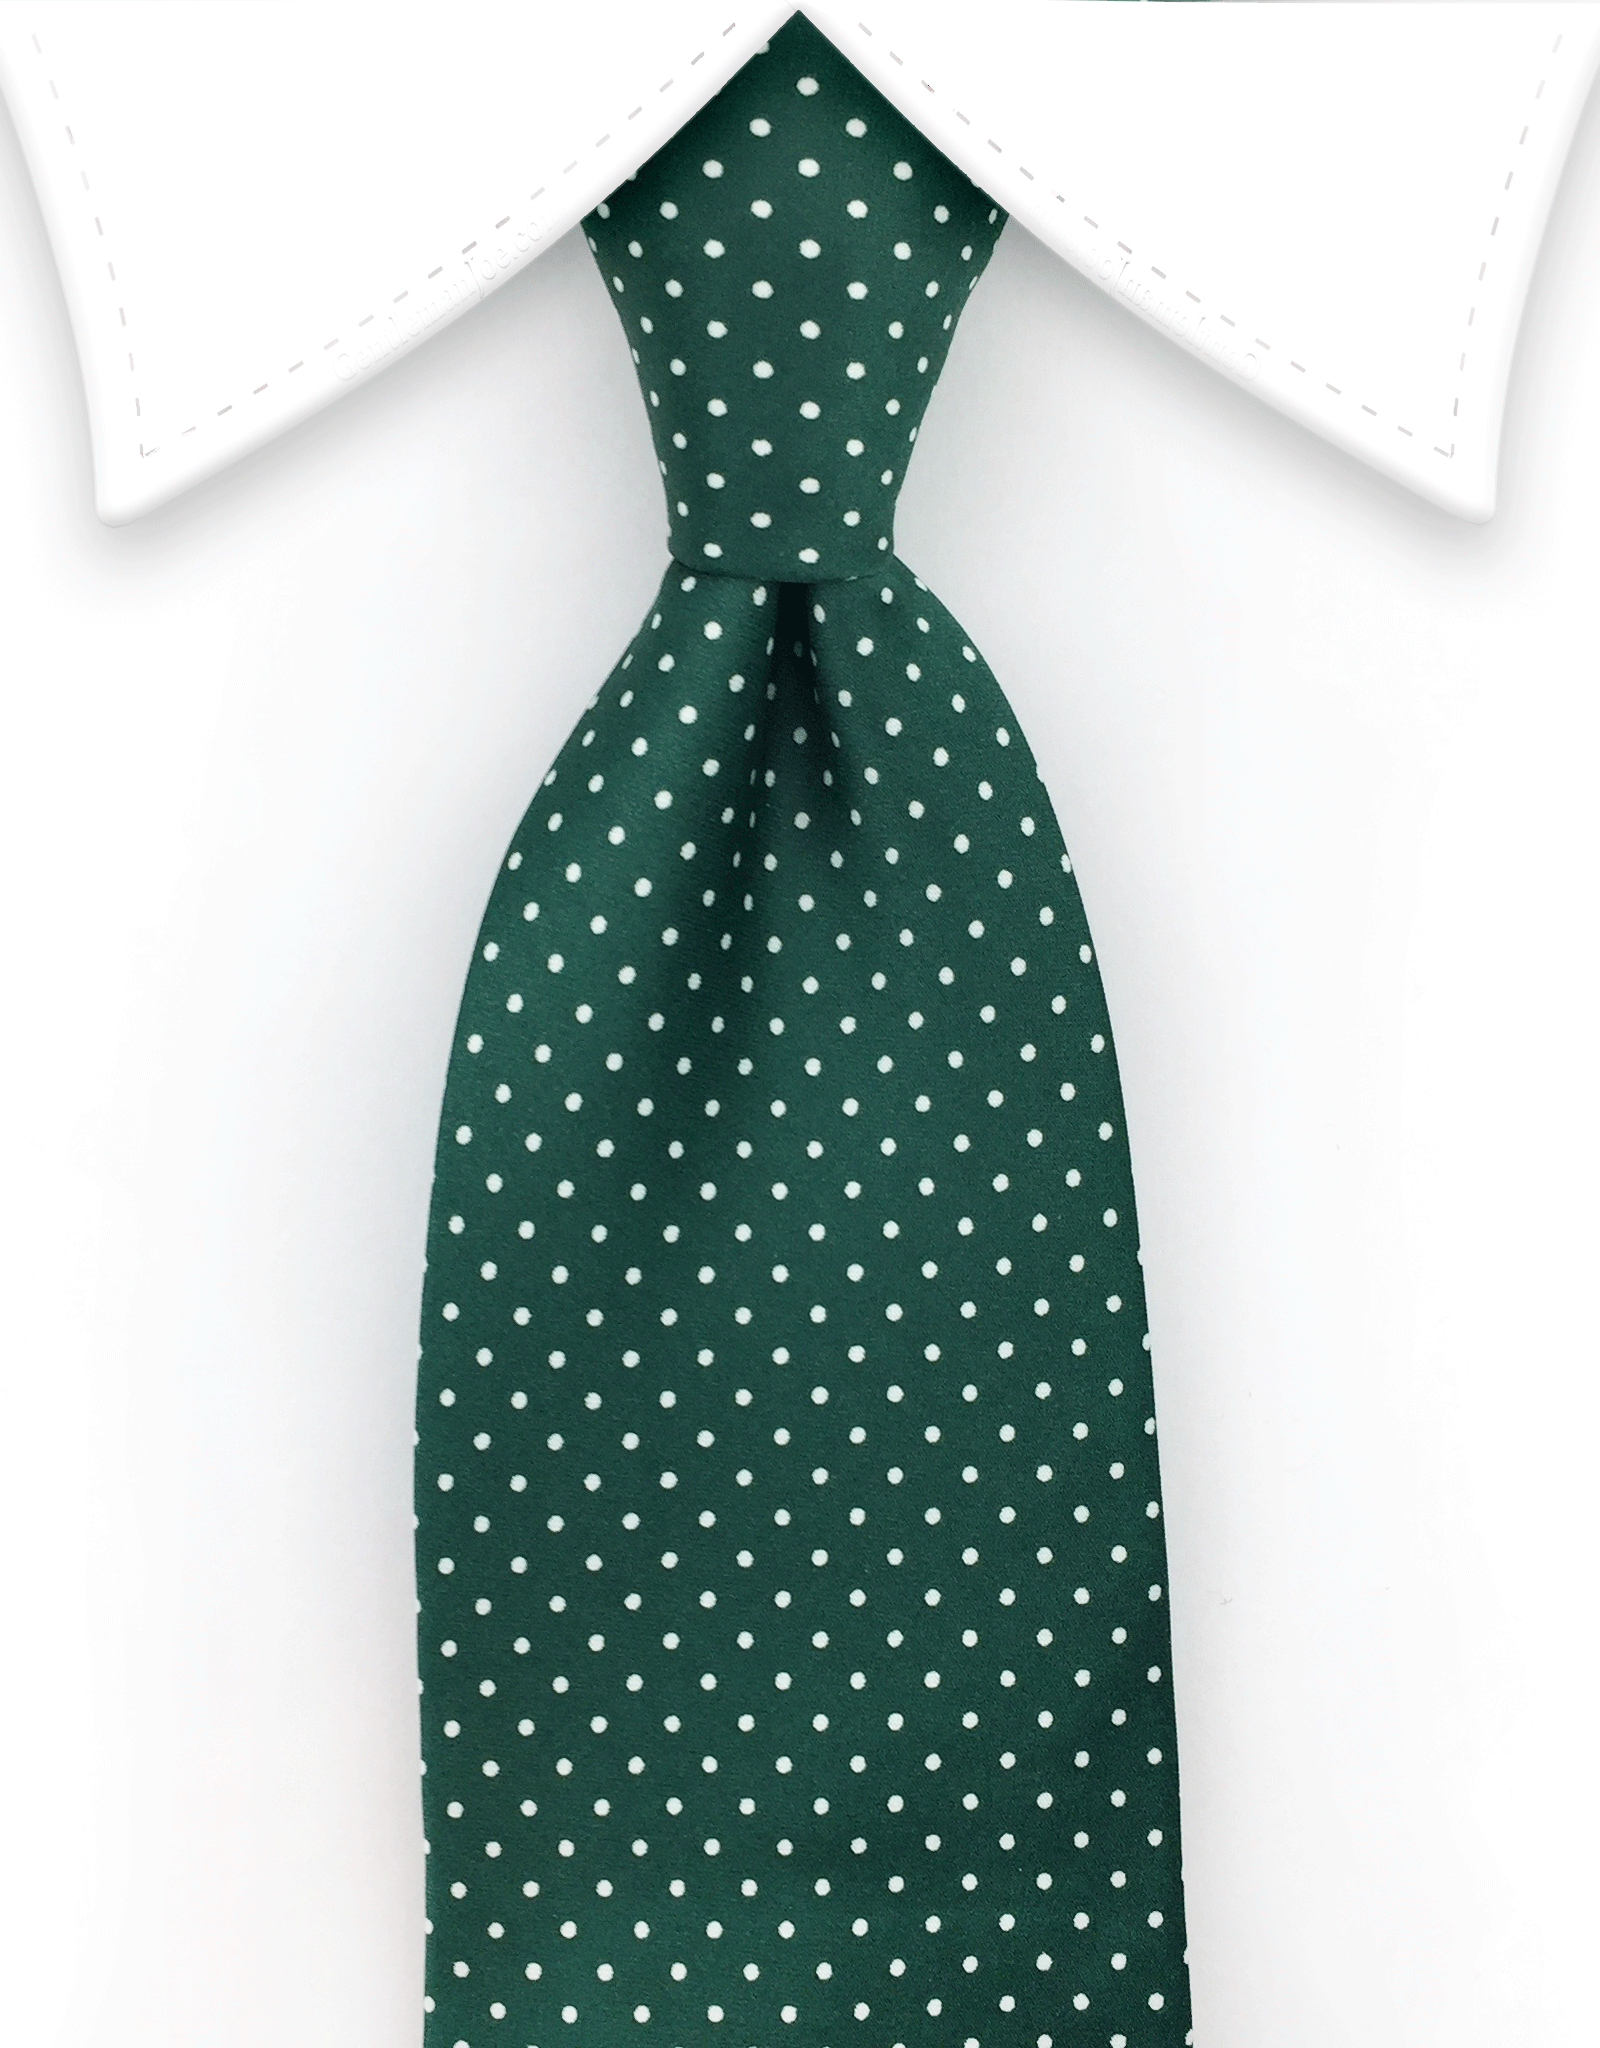 Green tie with white pin dots